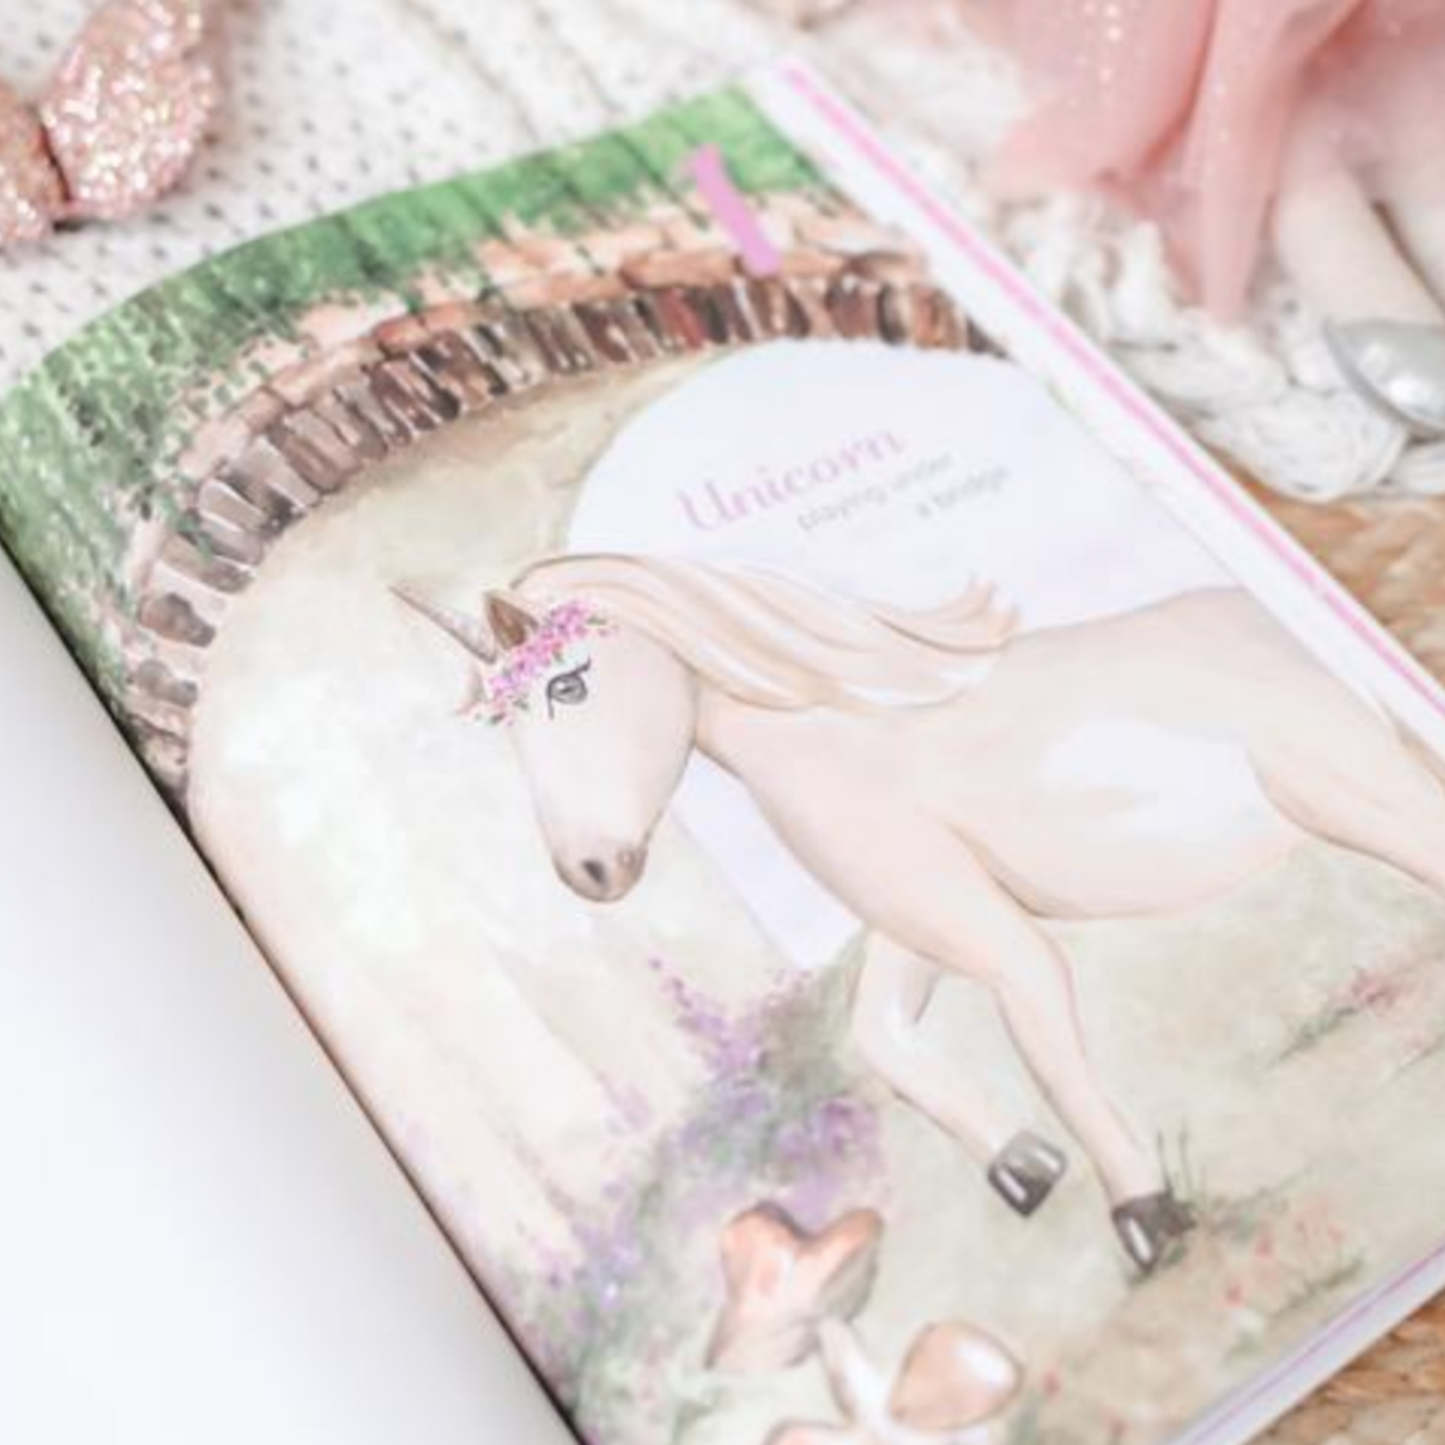 ADORED ILLUSTRATIONS - The Enchanting 123 Book